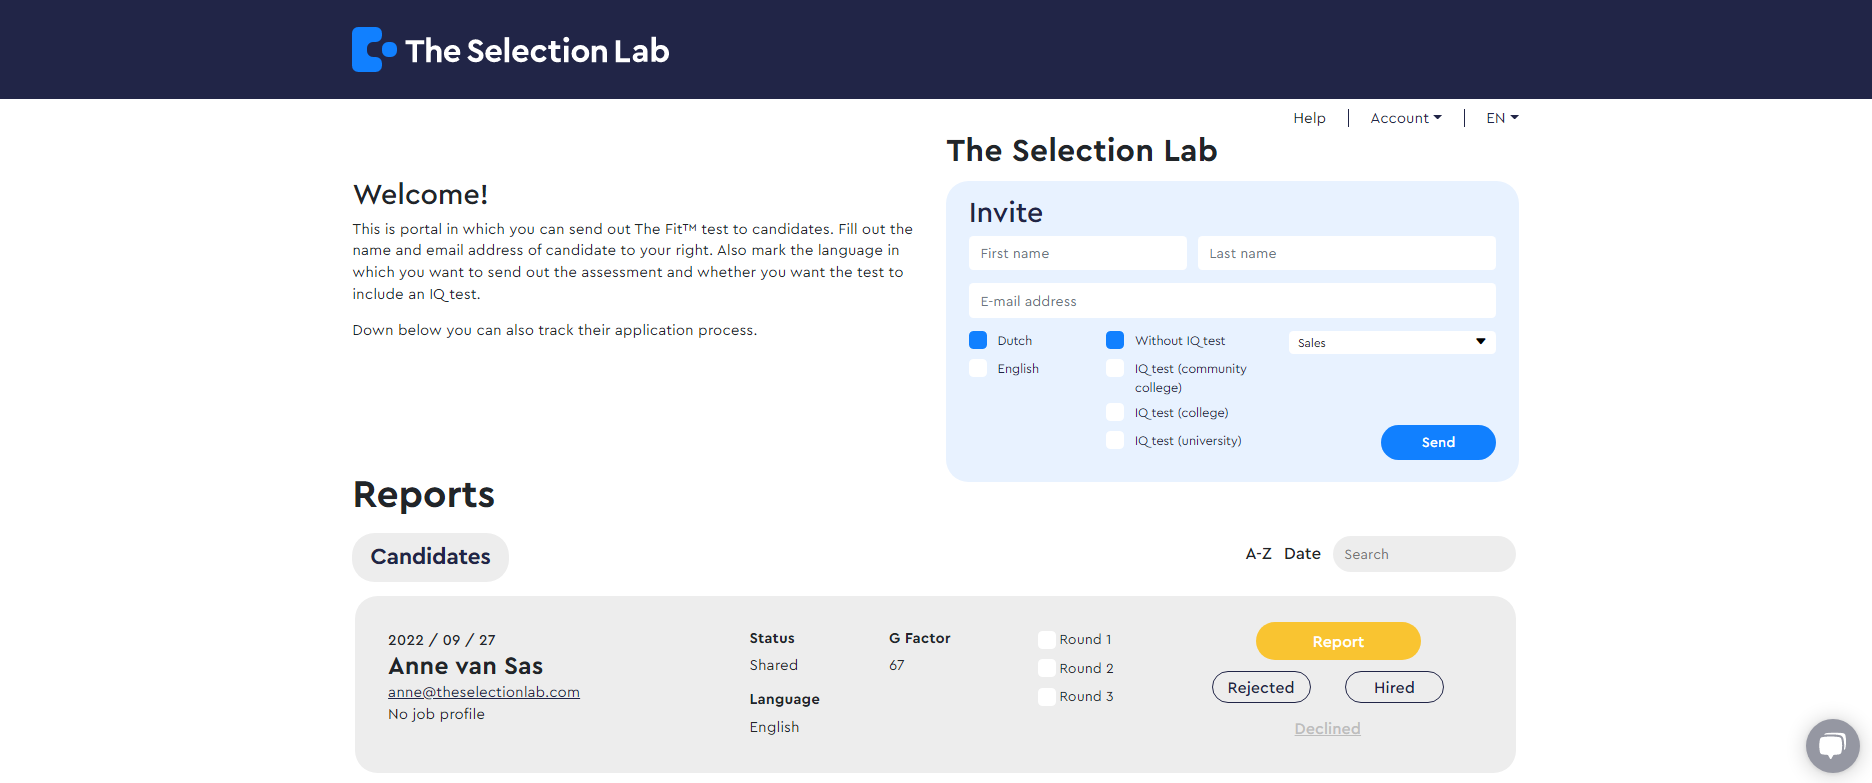 The Selection Lab 3cd9f364-1c80-467c-8ce8-feec6dc57292.png